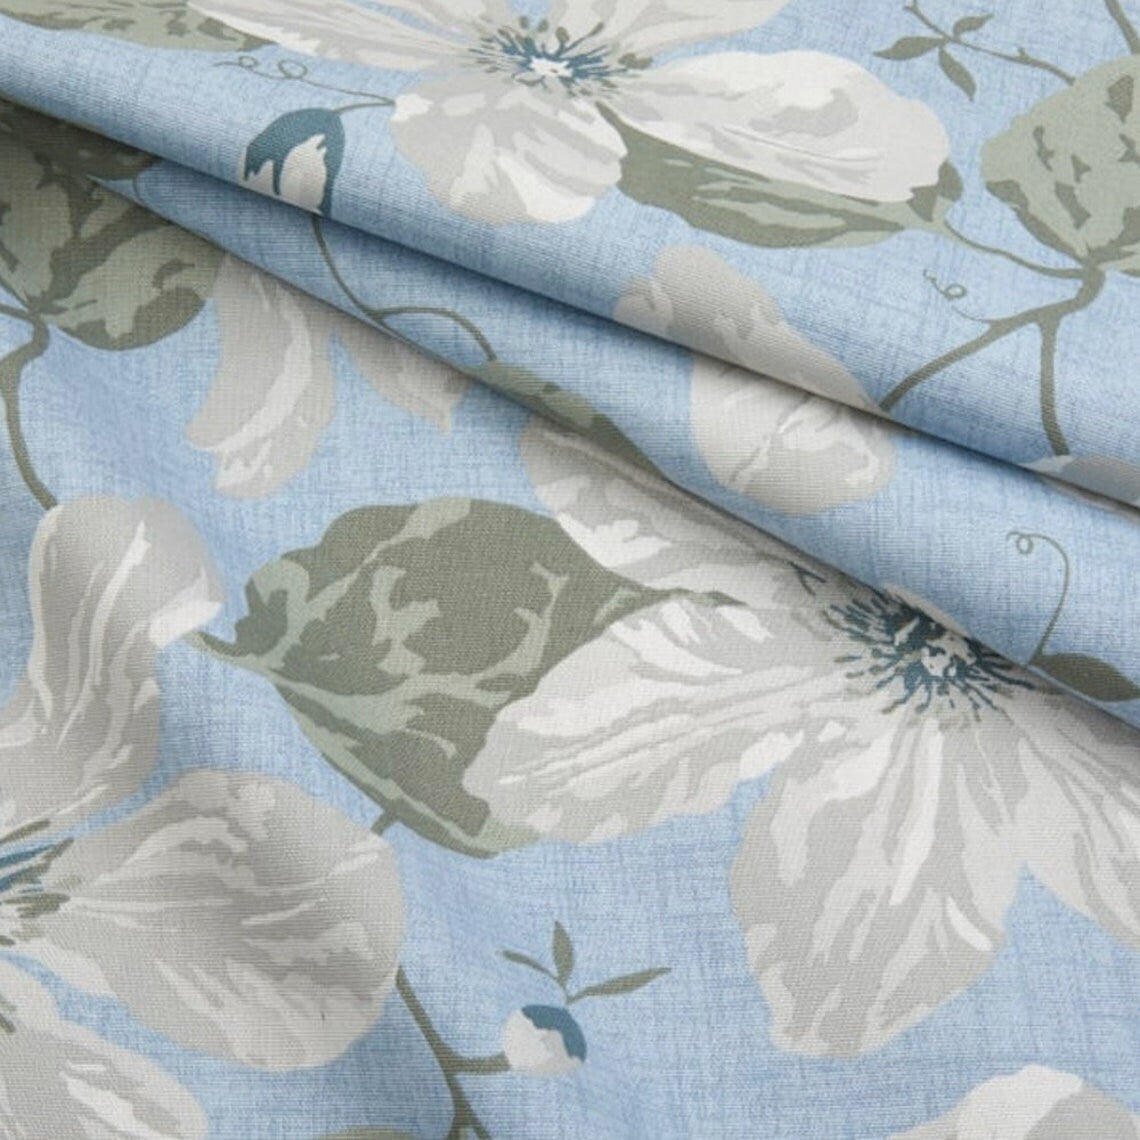 tailored valance in nelly antique blue floral, large scale